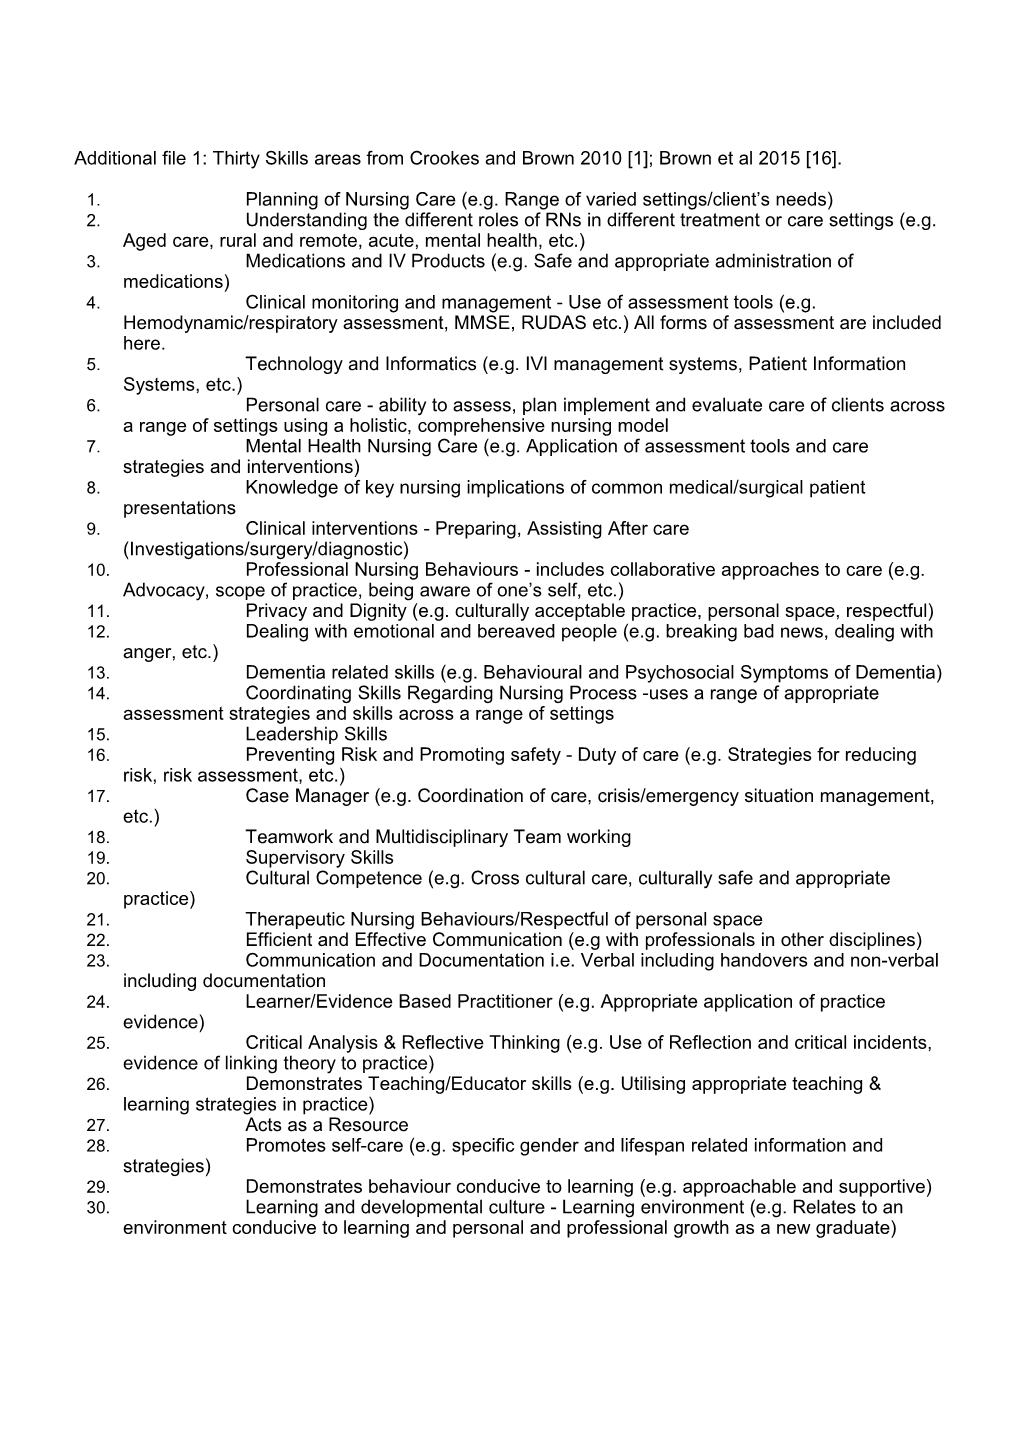 Additional File 1: Thirty Skills Areas from Crookes and Brown 2010 1 ; Brown Et Al 2015 16